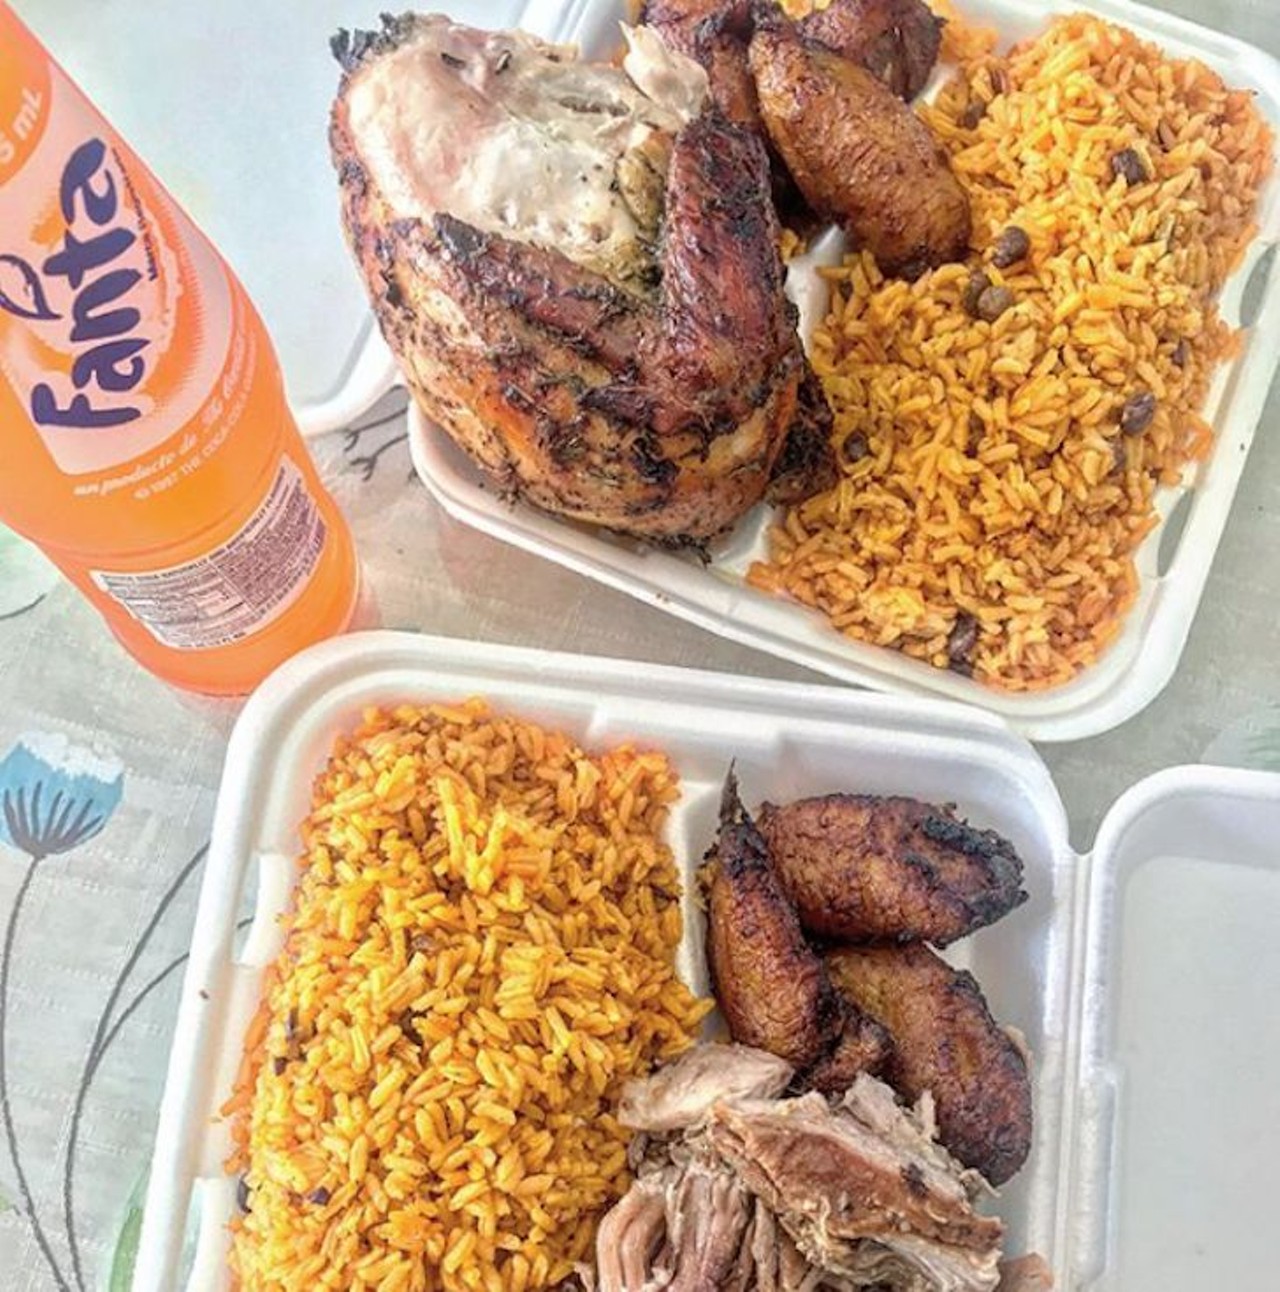 Lechonera El Barrio
435 N Semoran Blvd., (407) 384-3145
Serving up traditional Puerto Rican and Dominican food, meals range from arroz con gandules and pernil, to chicken and pasteles. Don&#146;t forget the tres leches for dessert.
Photo via mr_mrsm0/Instagram